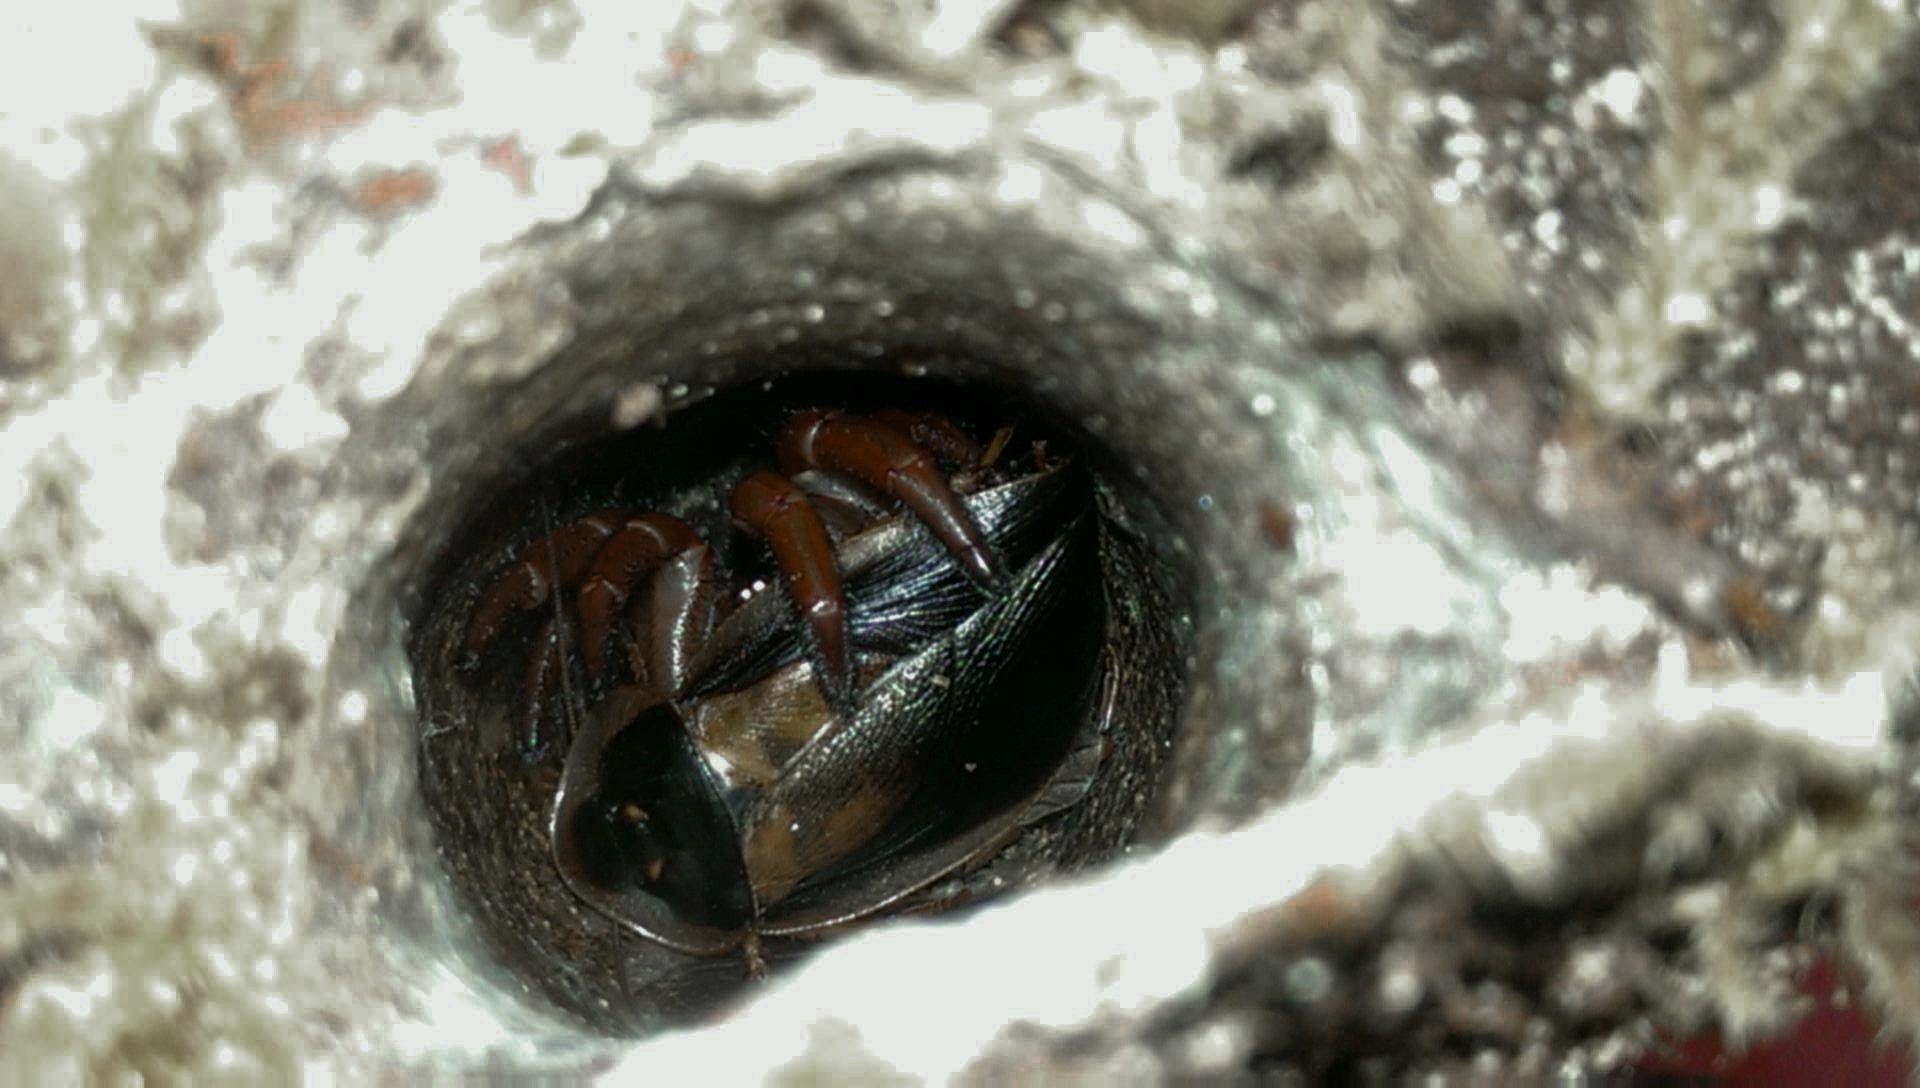 Red Trapdoor Spider Feeding - A View Down the Spider Hole - YouTube